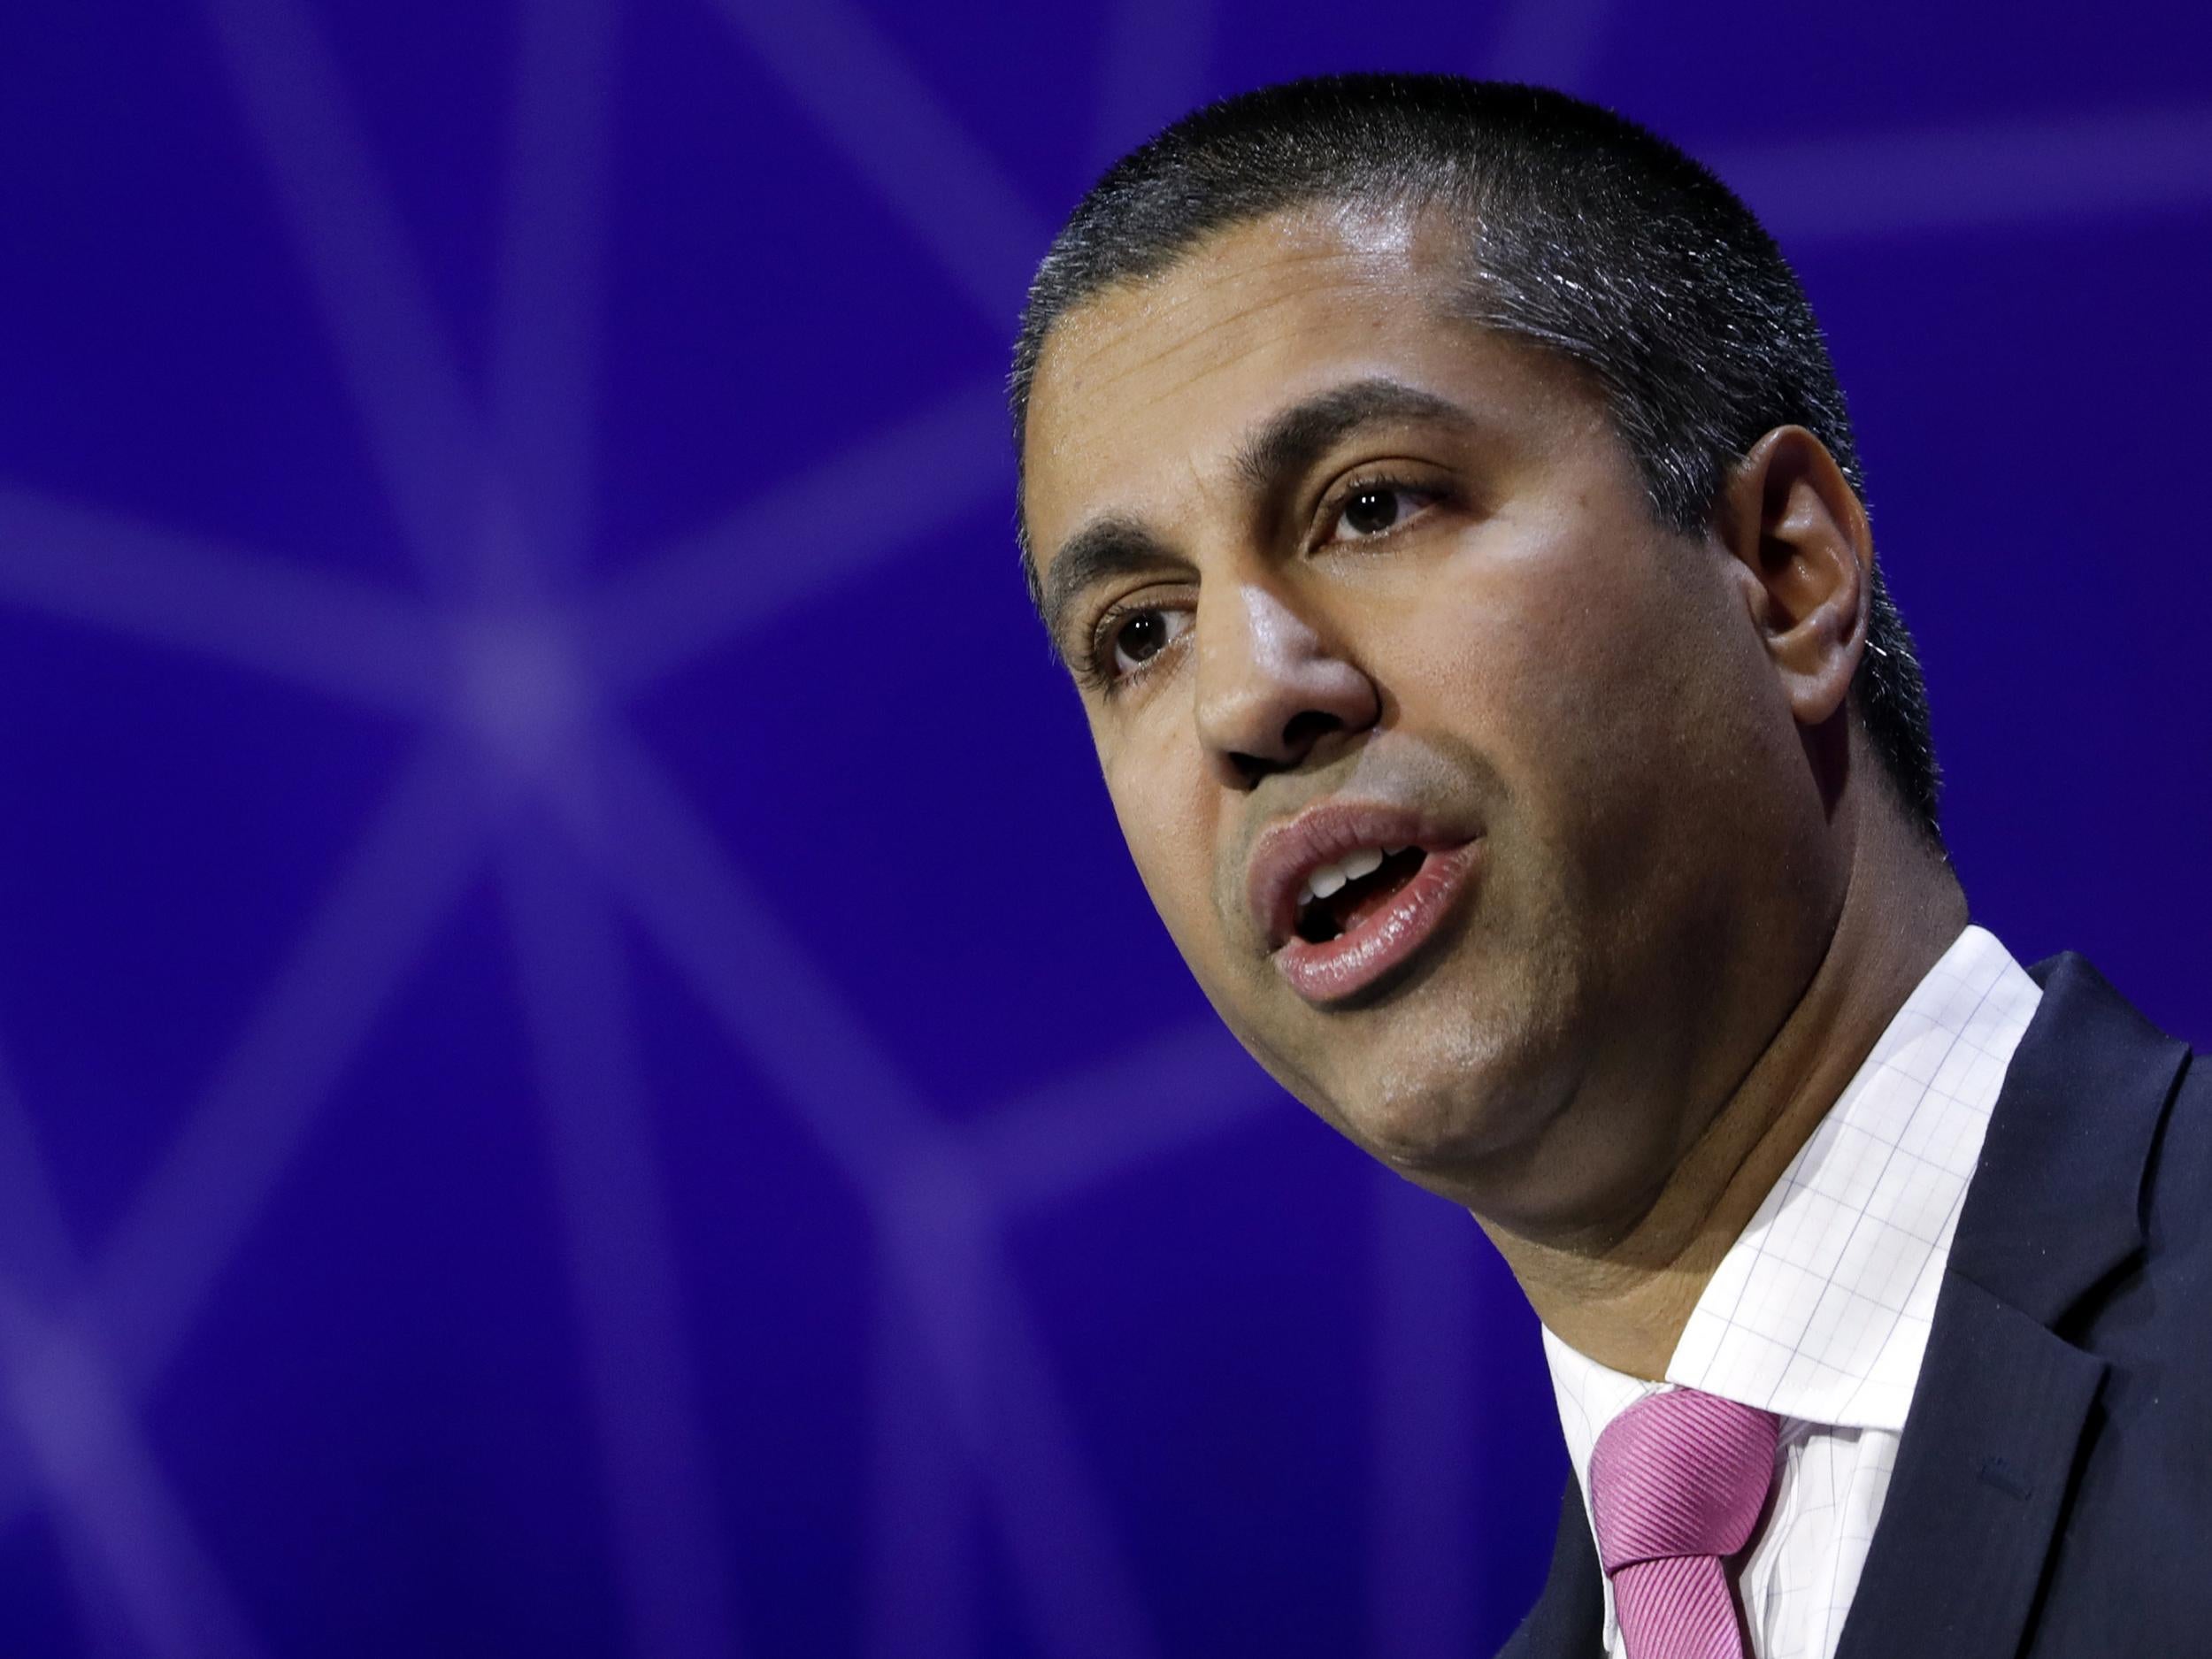 New Federal Communications Commission chairman Ajit Pai